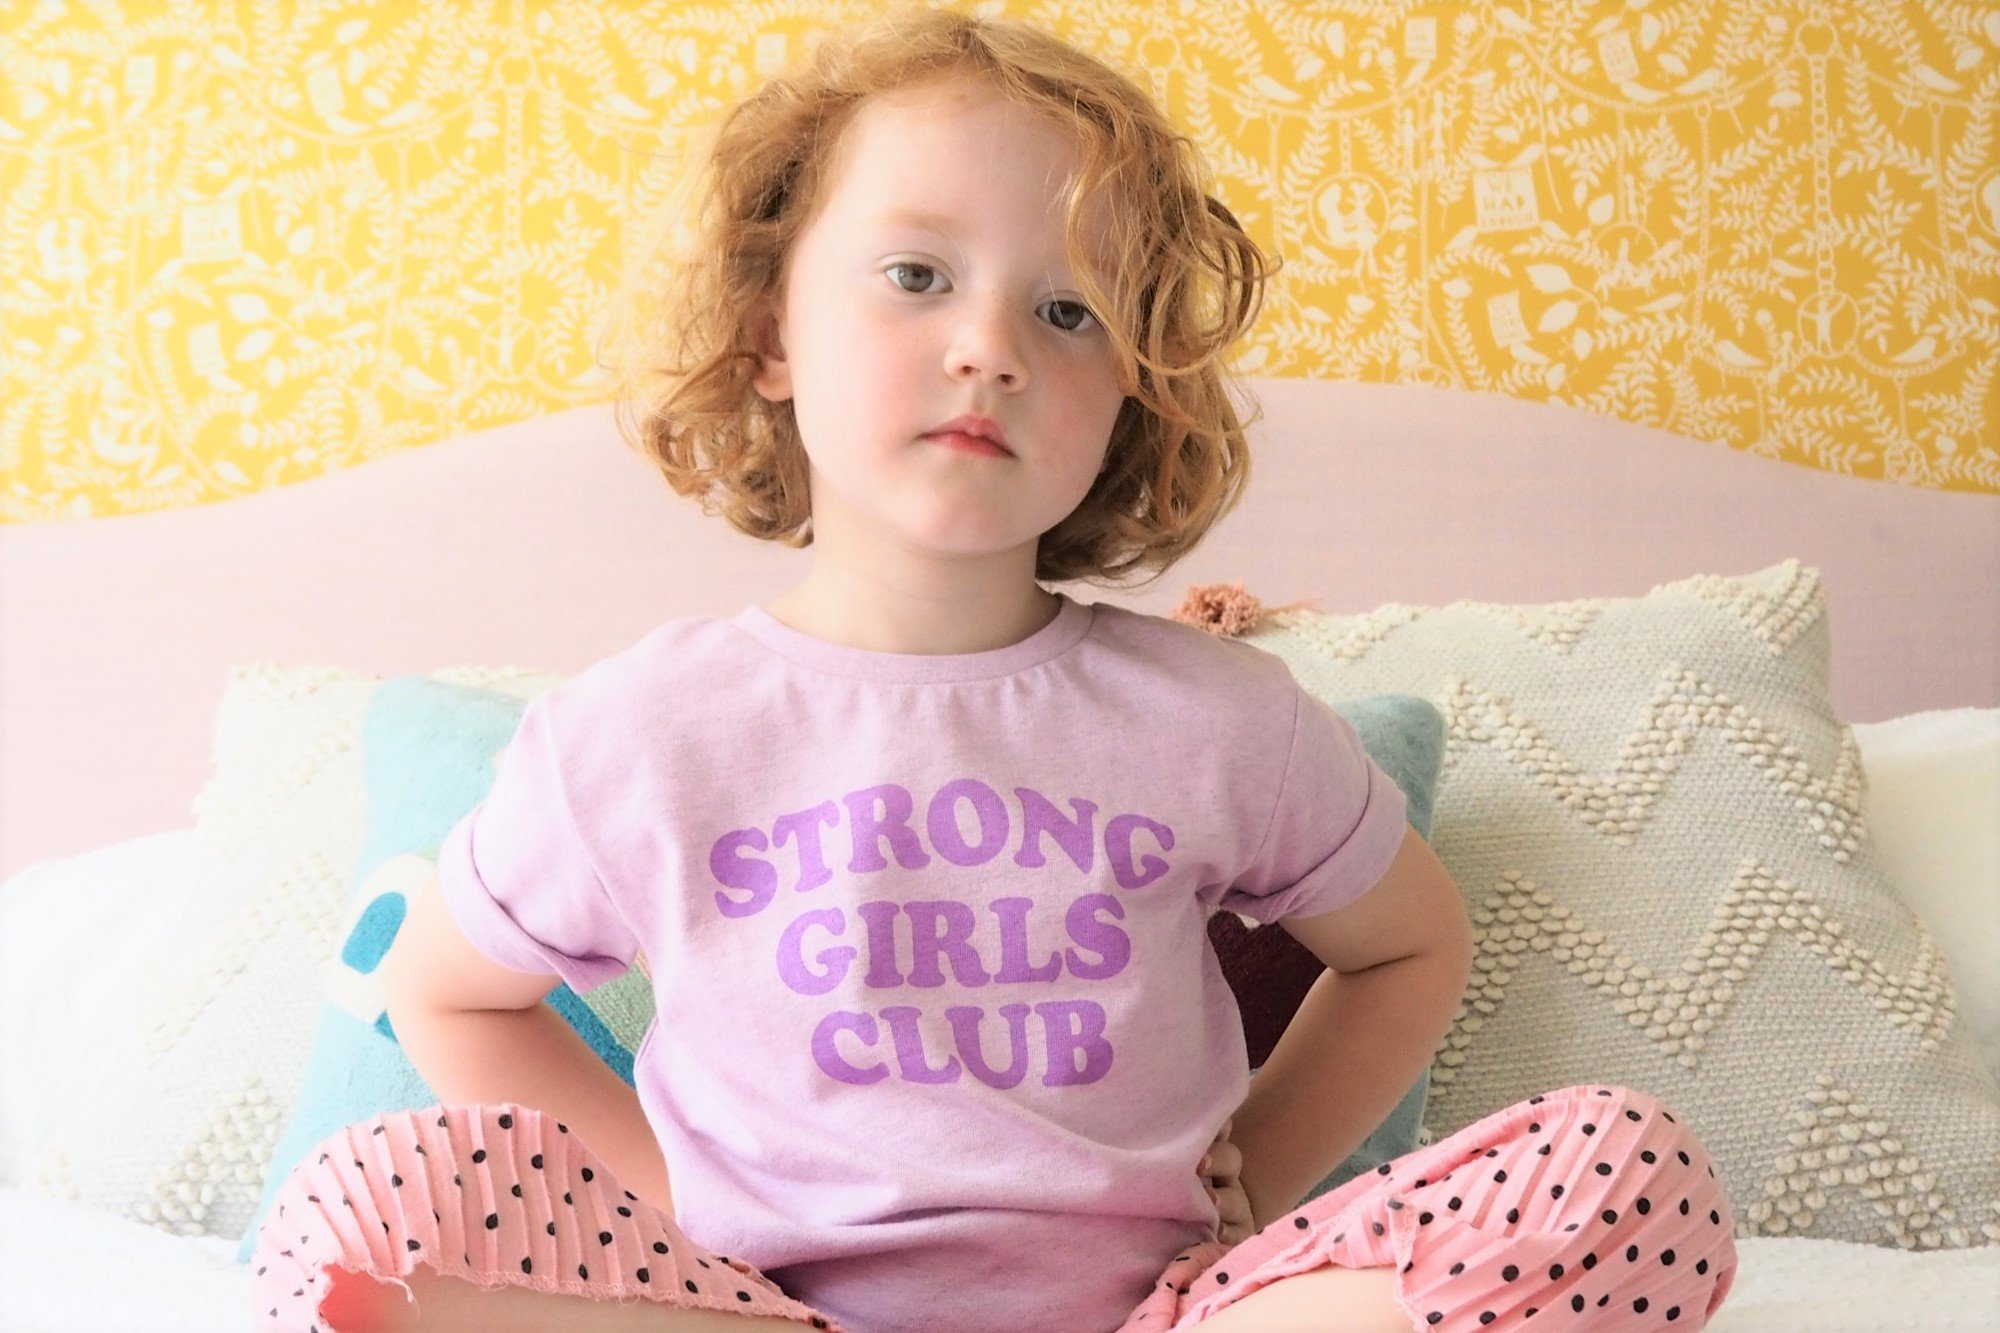 A young girl modelling a lilac t-shirt with the words Strong Girls Club on